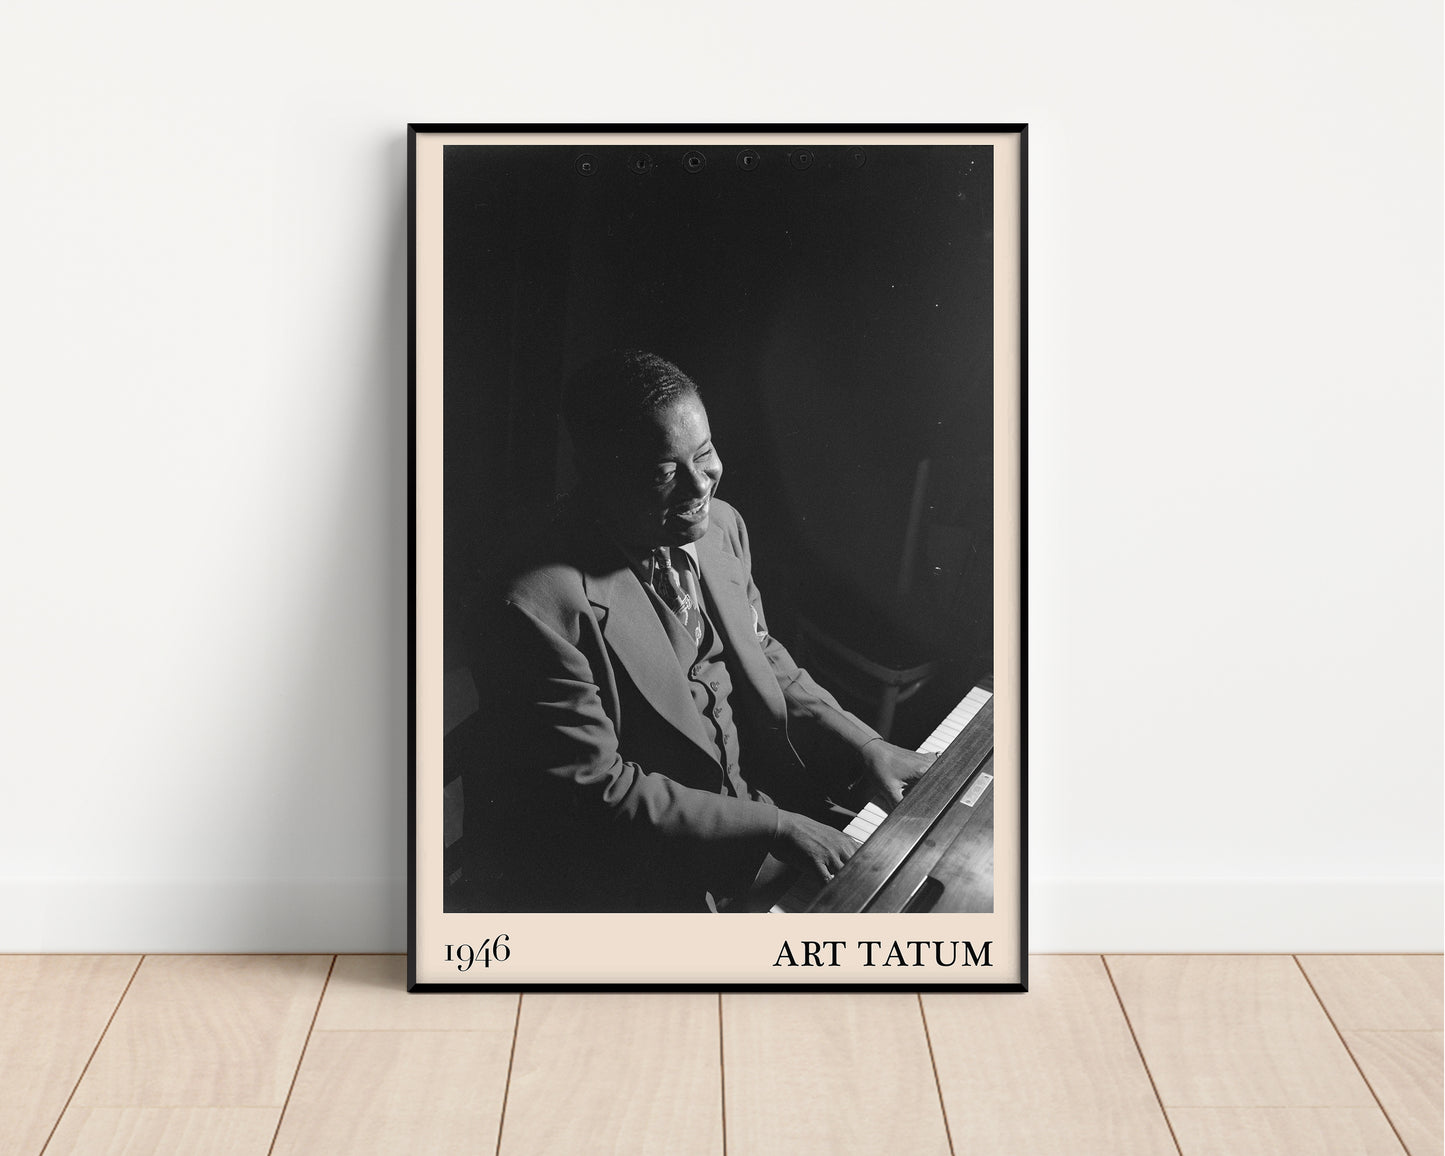 1946 photograph of Art Tatum crafted into a framed jazz poster. The poster has an off-white border and a thin black frame. The poster is resting against a white wall.